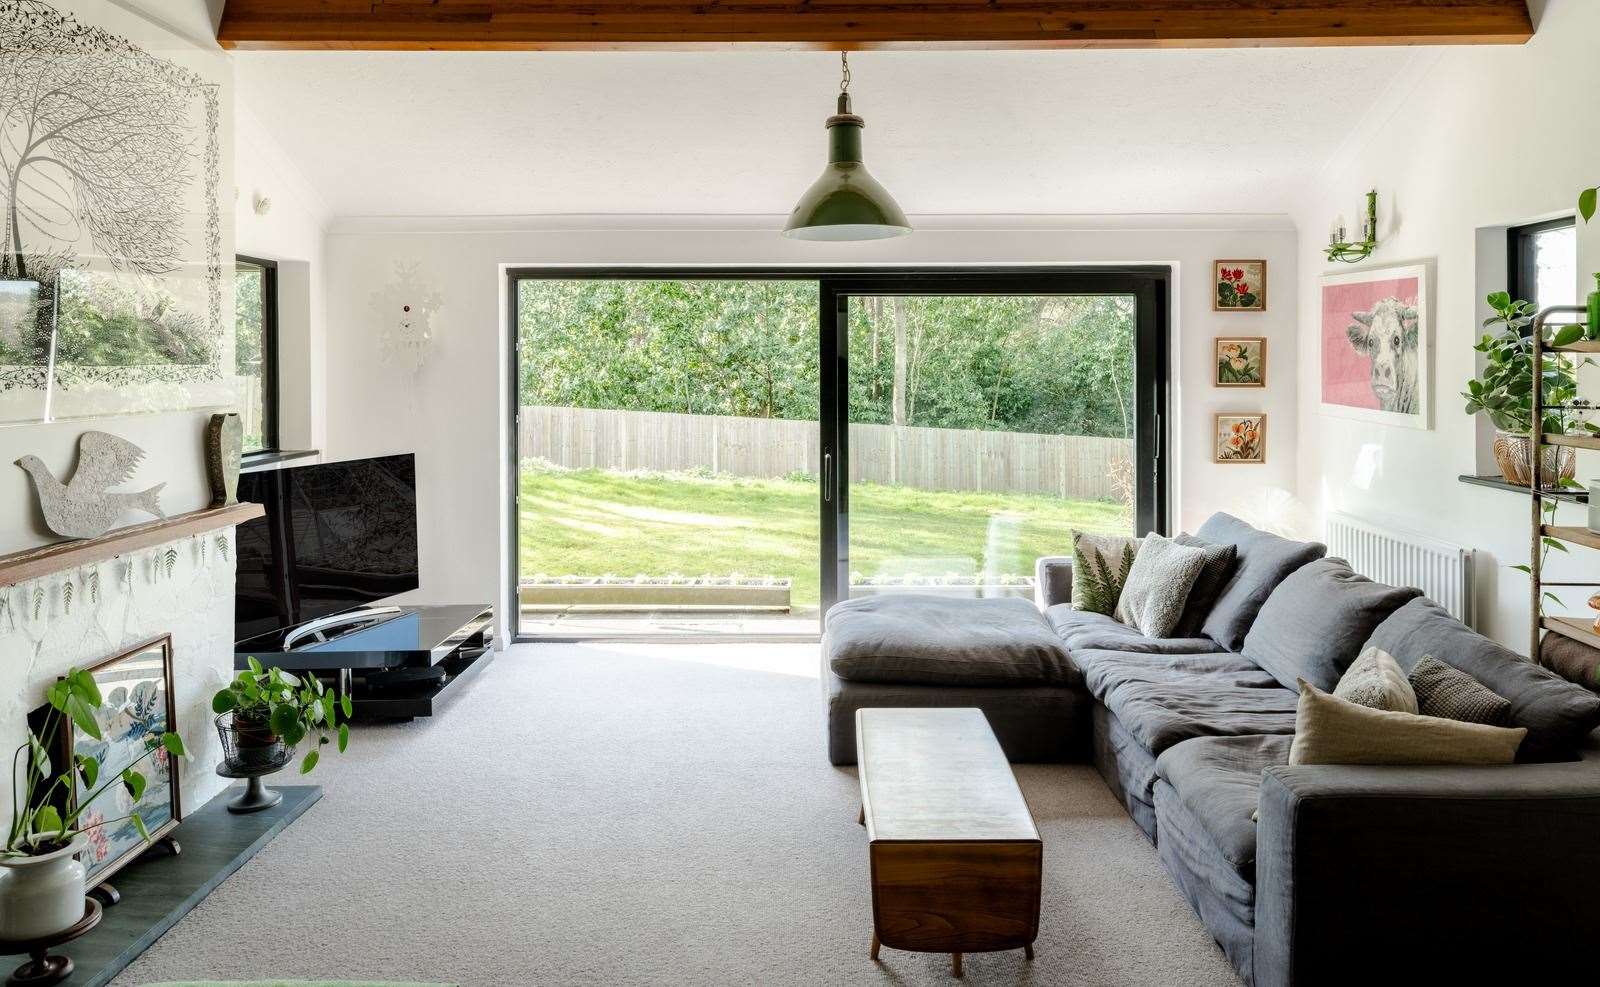 The owners have tried to create a more relaxed, casual vibe in the spacious sitting room. Picture: The Modern House